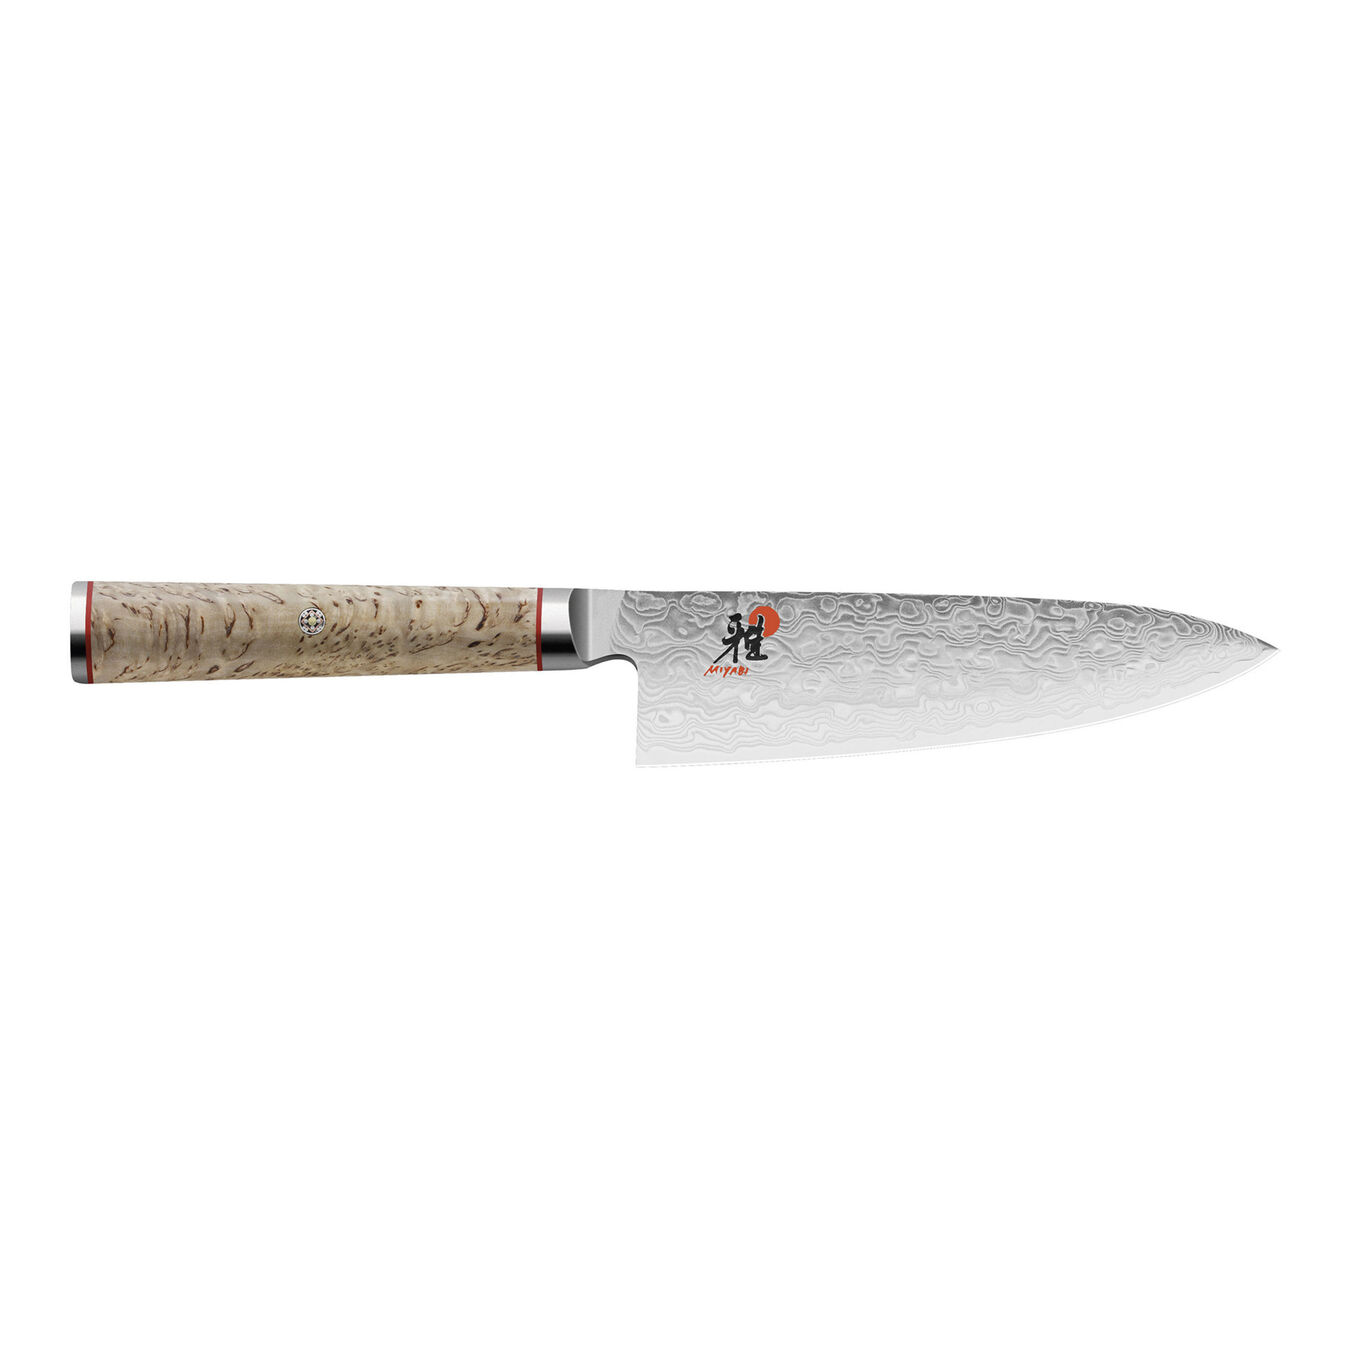 6-inch, Chef's Knife,,large 1